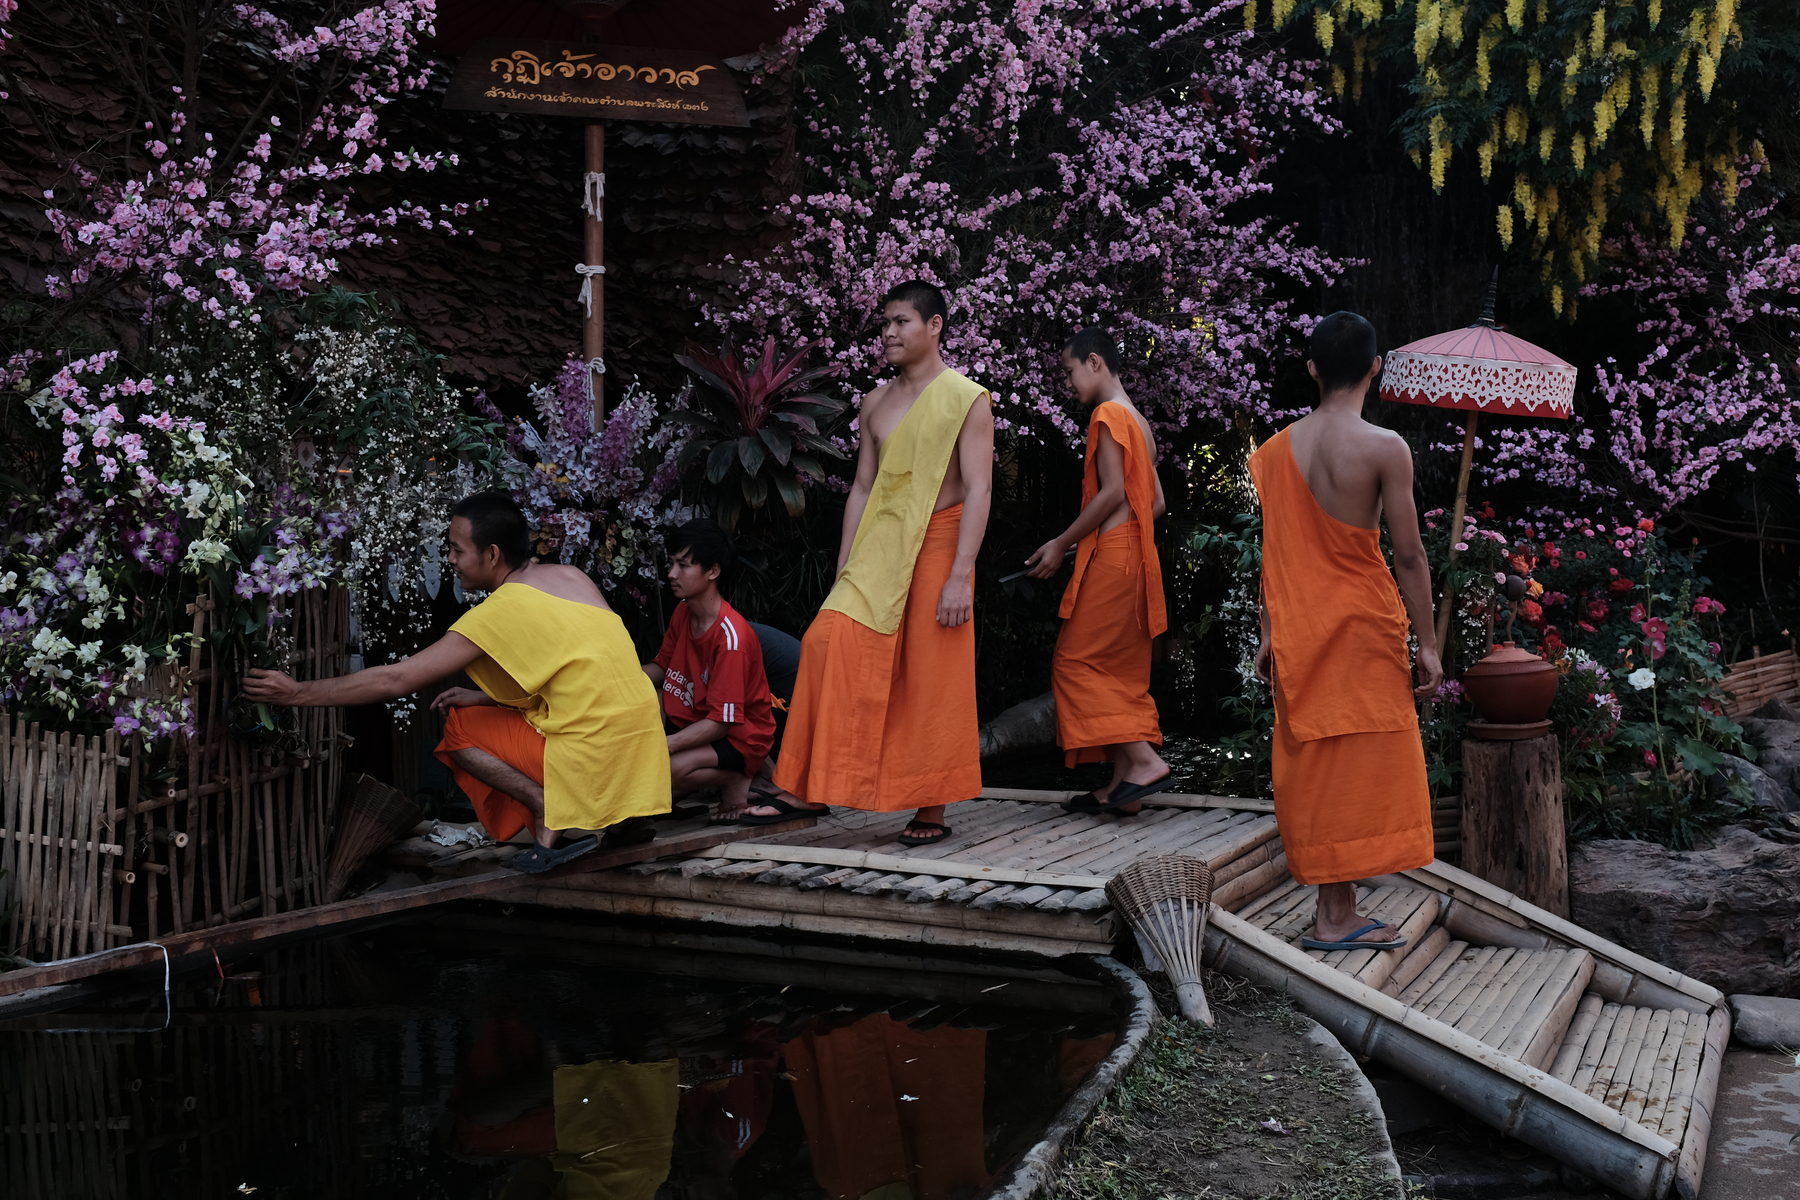 Individuals in traditional orange robes, likely Buddhist monks, walking across a bamboo bridge with a background of colorful flowers.